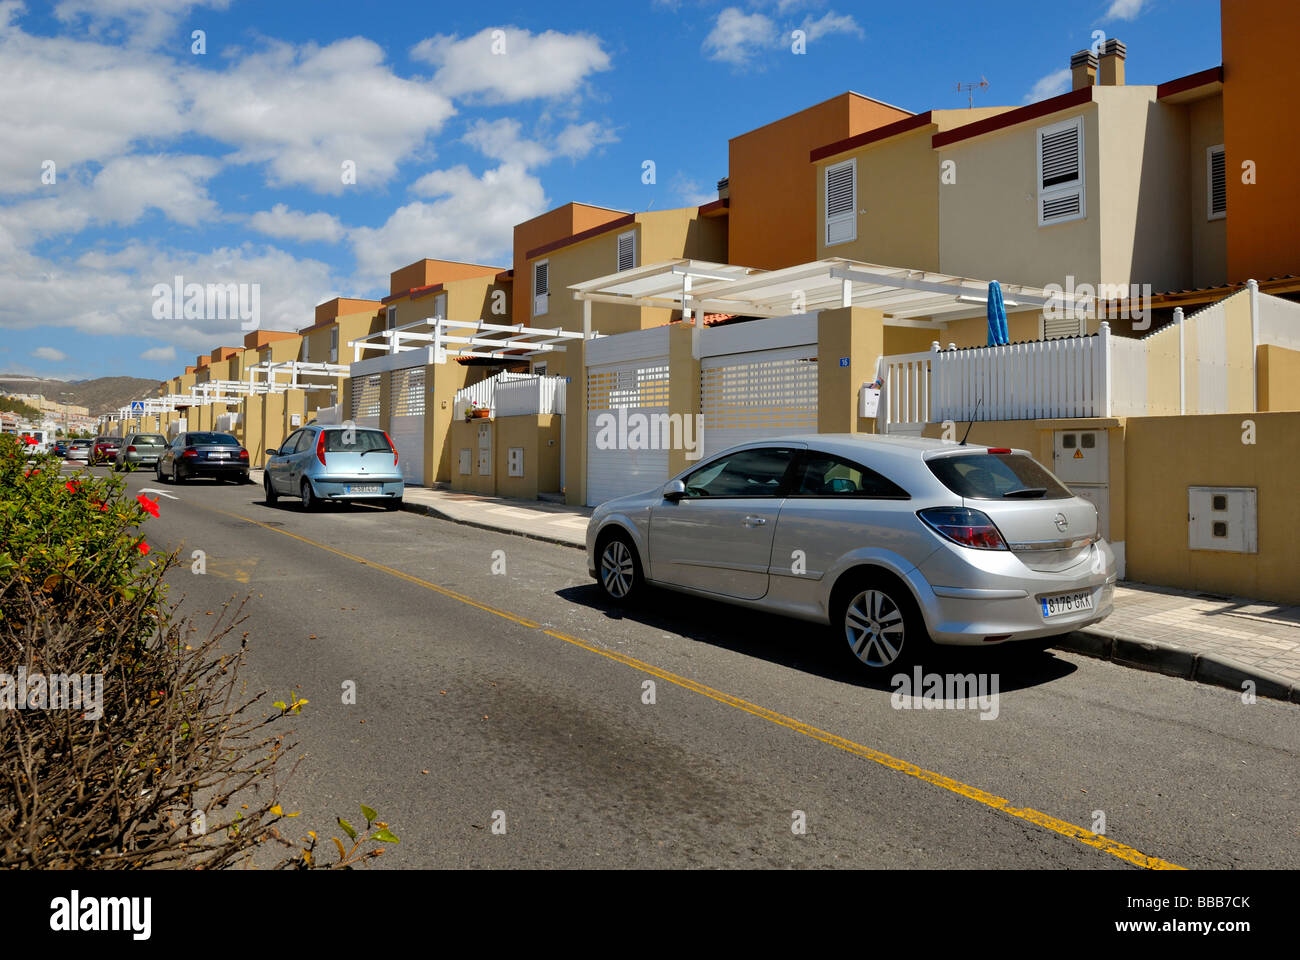 The new apartments in a small coastal village of Arguineguin, Gran Canaria, Canary Islands, Spain, Europe. Stock Photo